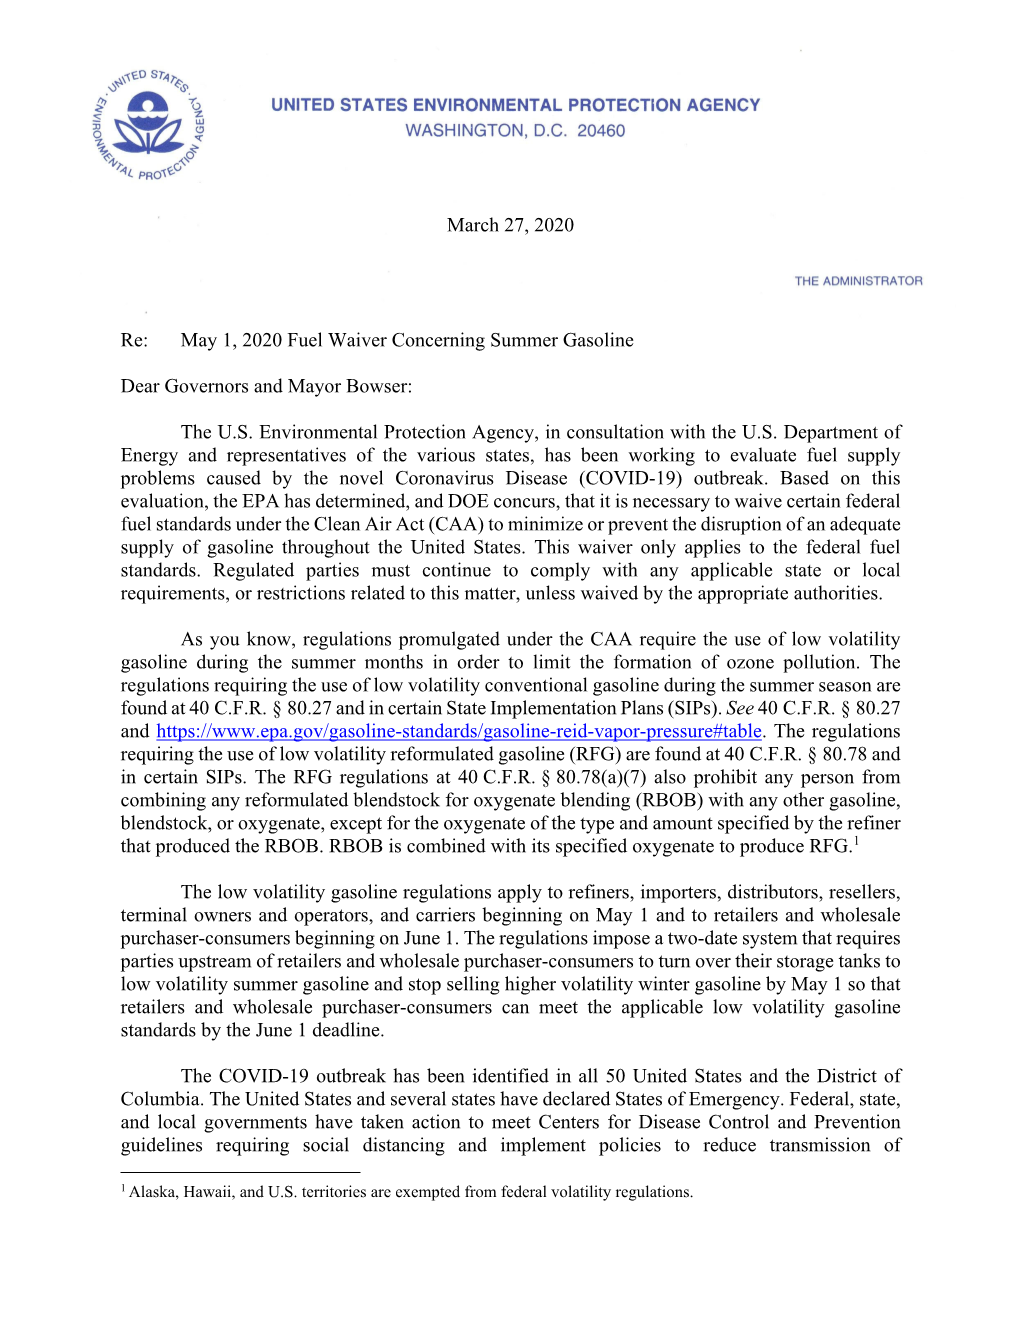 May 1, 2020 Fuel Waiver Concerning Summer Gasoline Dear Governors